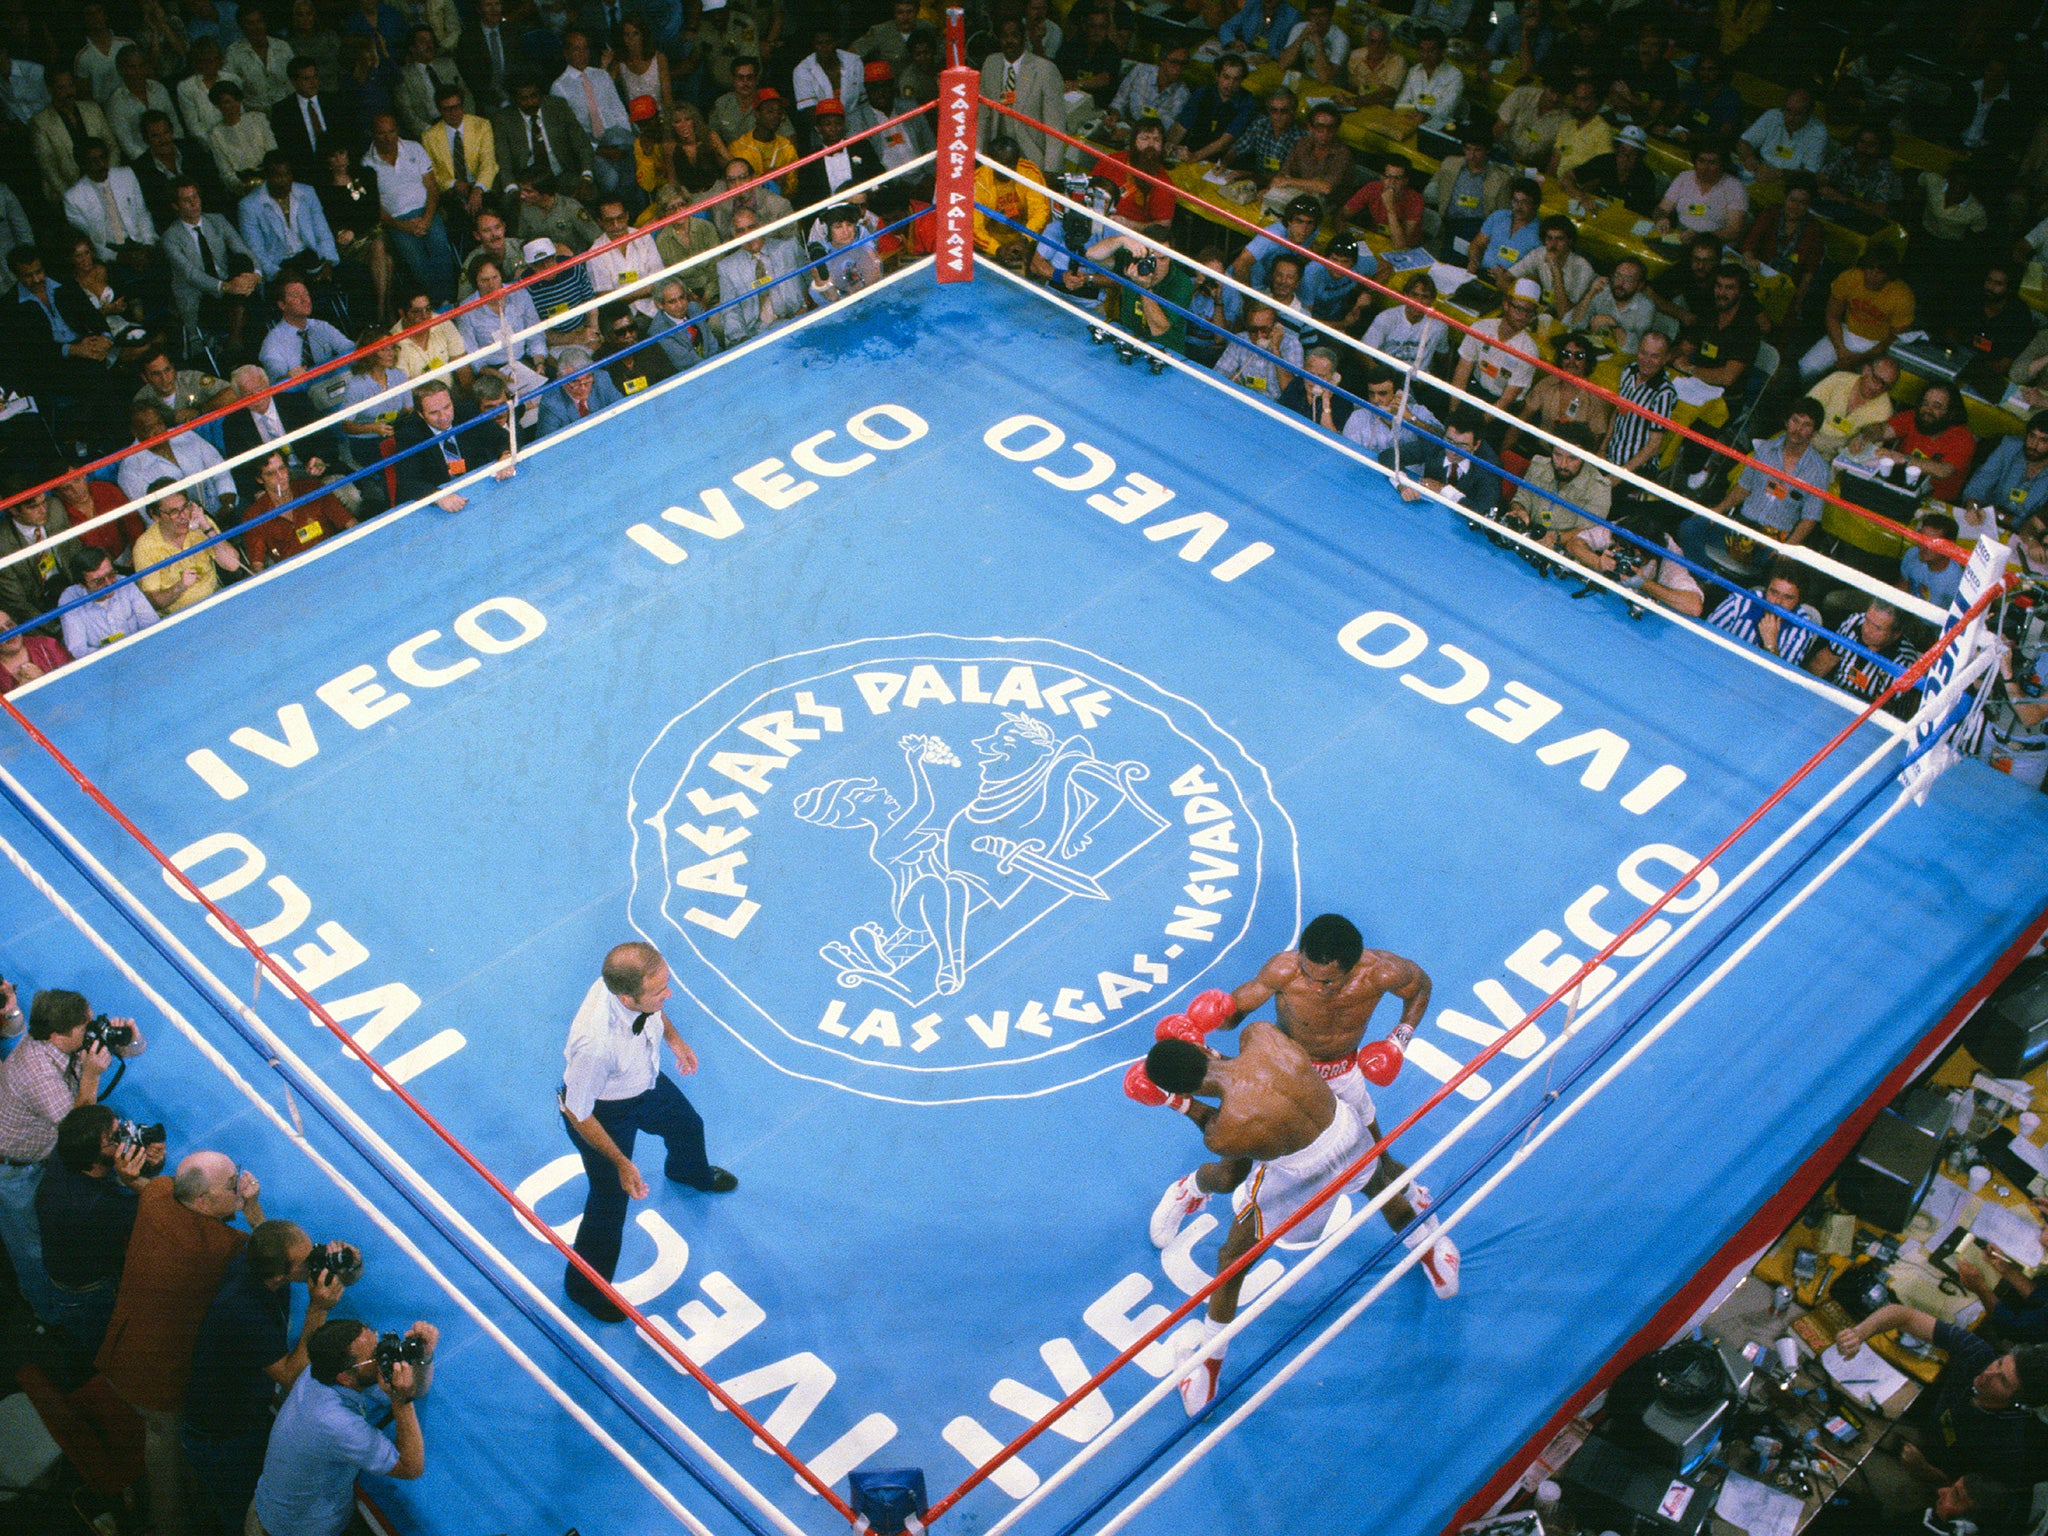 Sugar Ray Leonard takes on Thomas Hearns in Caesars Palace, Las Vegas, in 1981 – during the glory days of both boxing and the casino